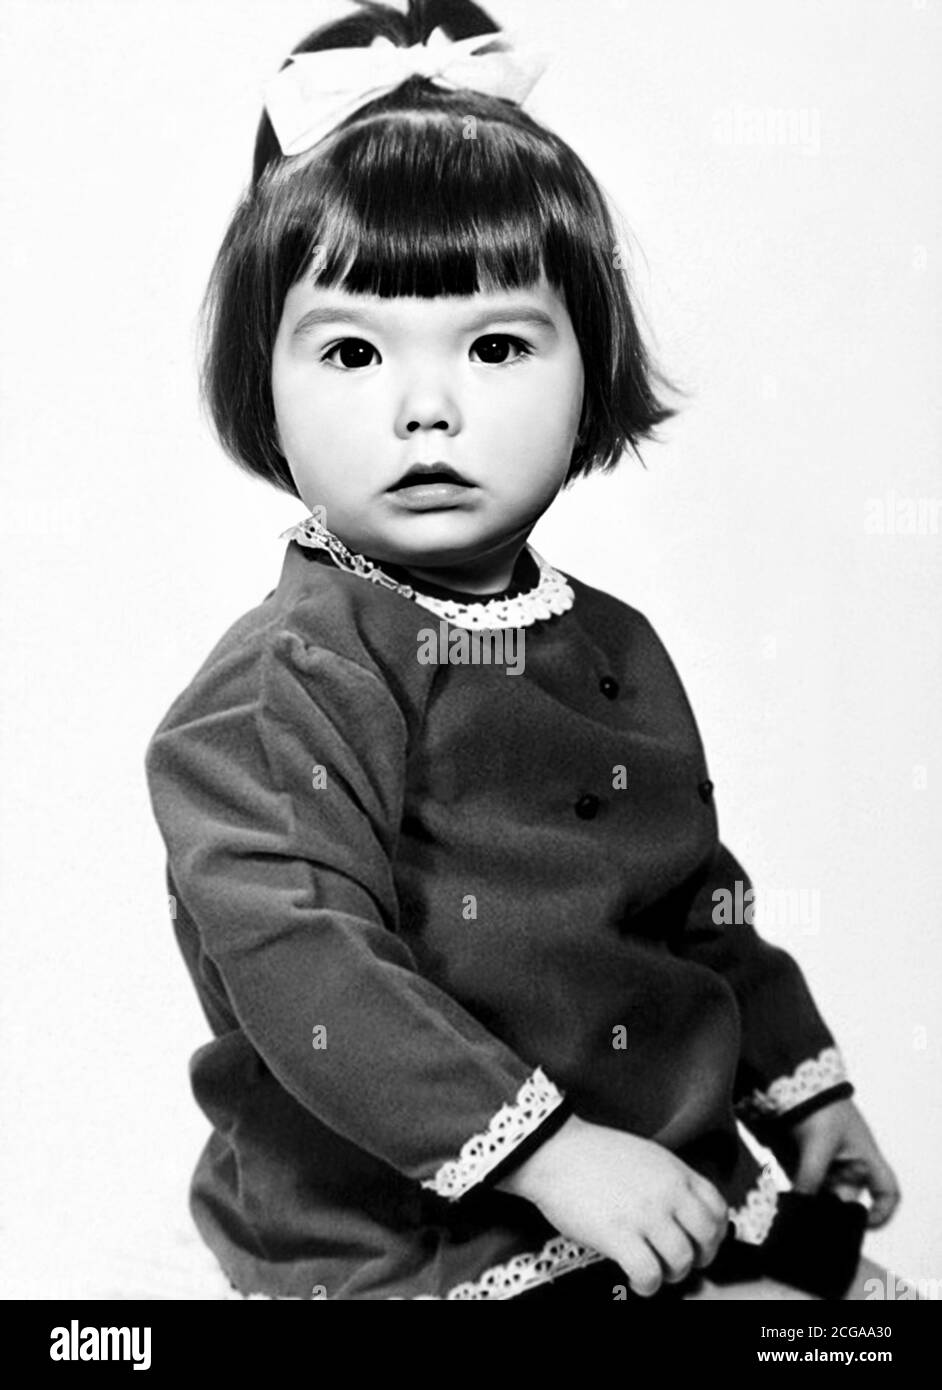 1968 ca, ICELAND : The celebrated icelander Pop singer and composer BJORK Björk Guðmundsdóttir ( born in 1965 ) when was a young girl aged 3 . Unknown photographer. - HISTORY - FOTO STORICHE - personalità da bambino bambini da giovane - personality personalities when was young - INFANZIA - CHILDHOOD - BAMBINO - BAMBINA - BABY - BAMBINI - CHILDREN - CHILD - POP MUSIC - MUSICA - cantante - COMPOSITORE --- ARCHIVIO GBB Stock Photo